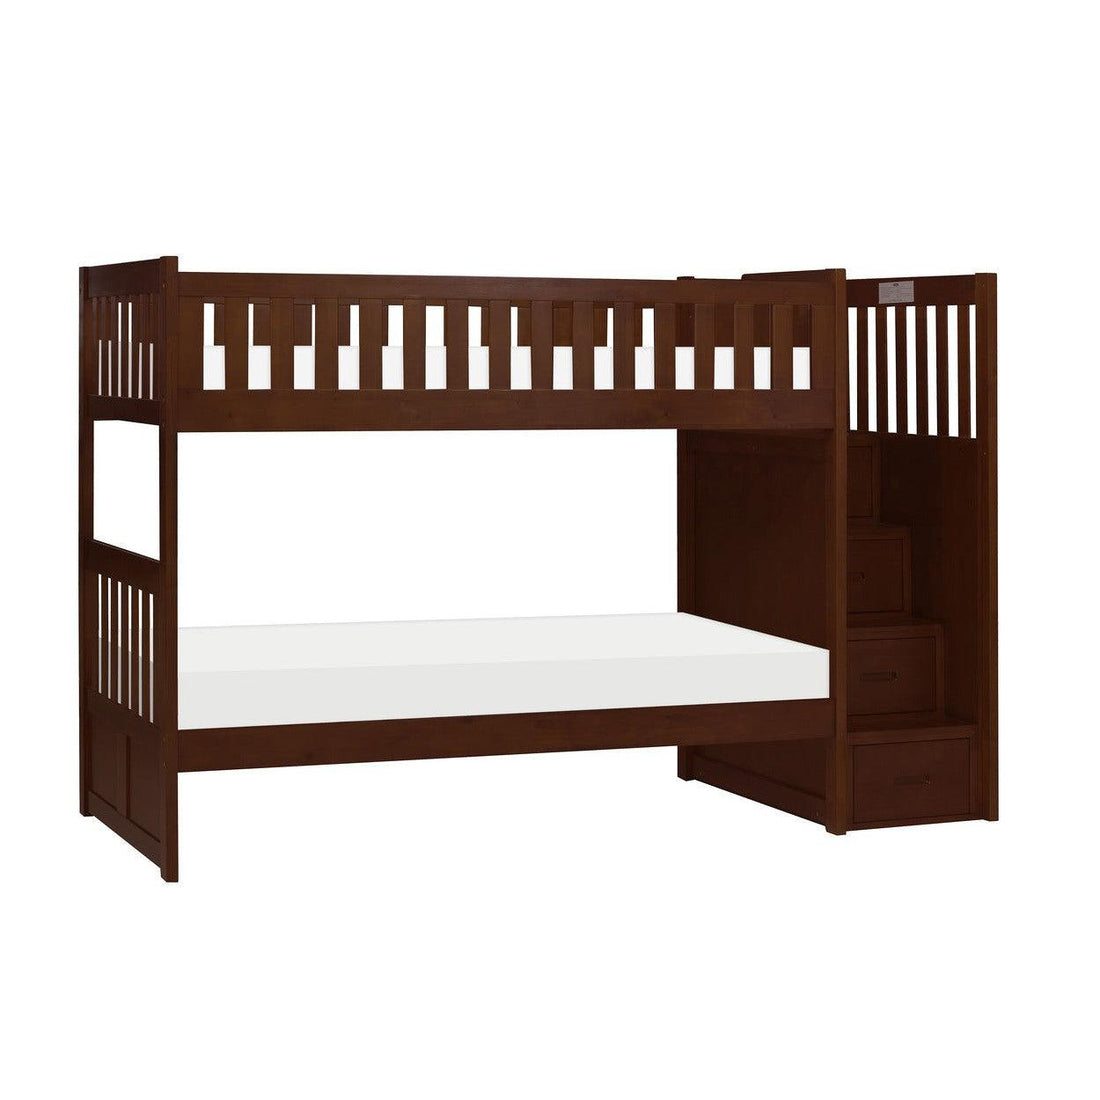 (4) BUNK BED WITH REVERSIBLE STEP STORAGE, DRK CHRY B2013SBDC-1*